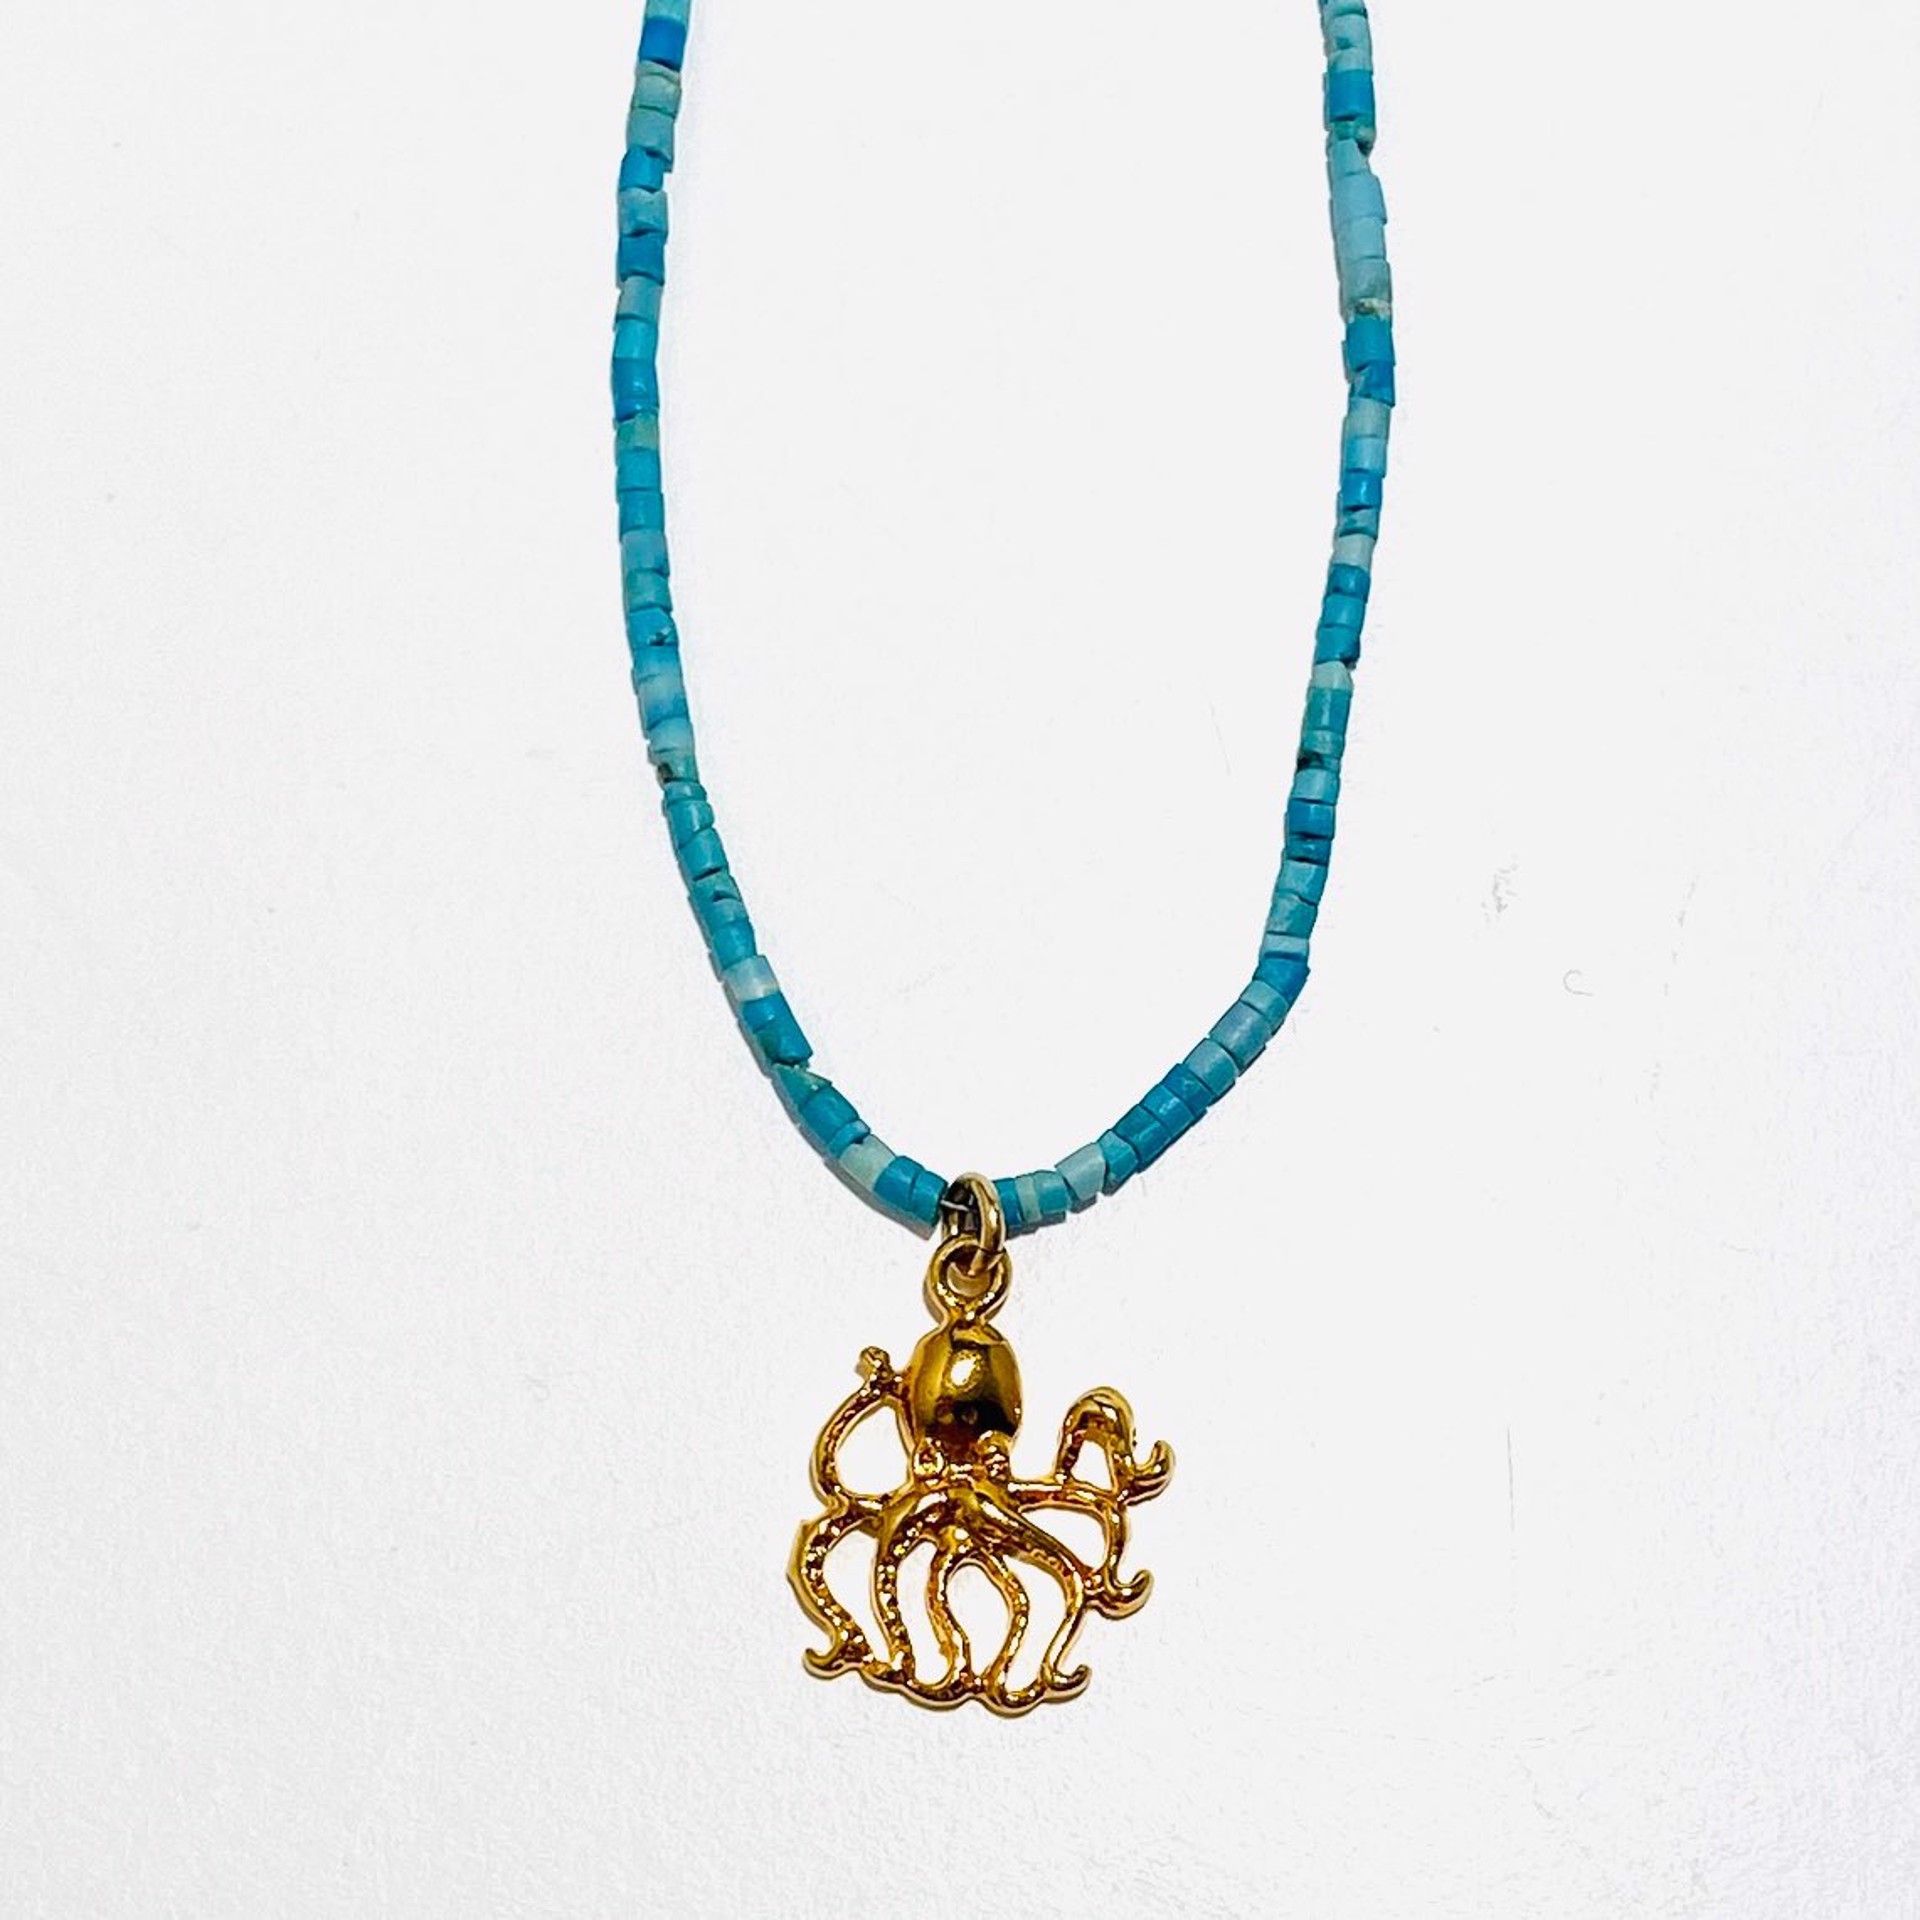 Tiny Afghan Turquoise Vermeil Octopus Necklace by Nance Trueworthy